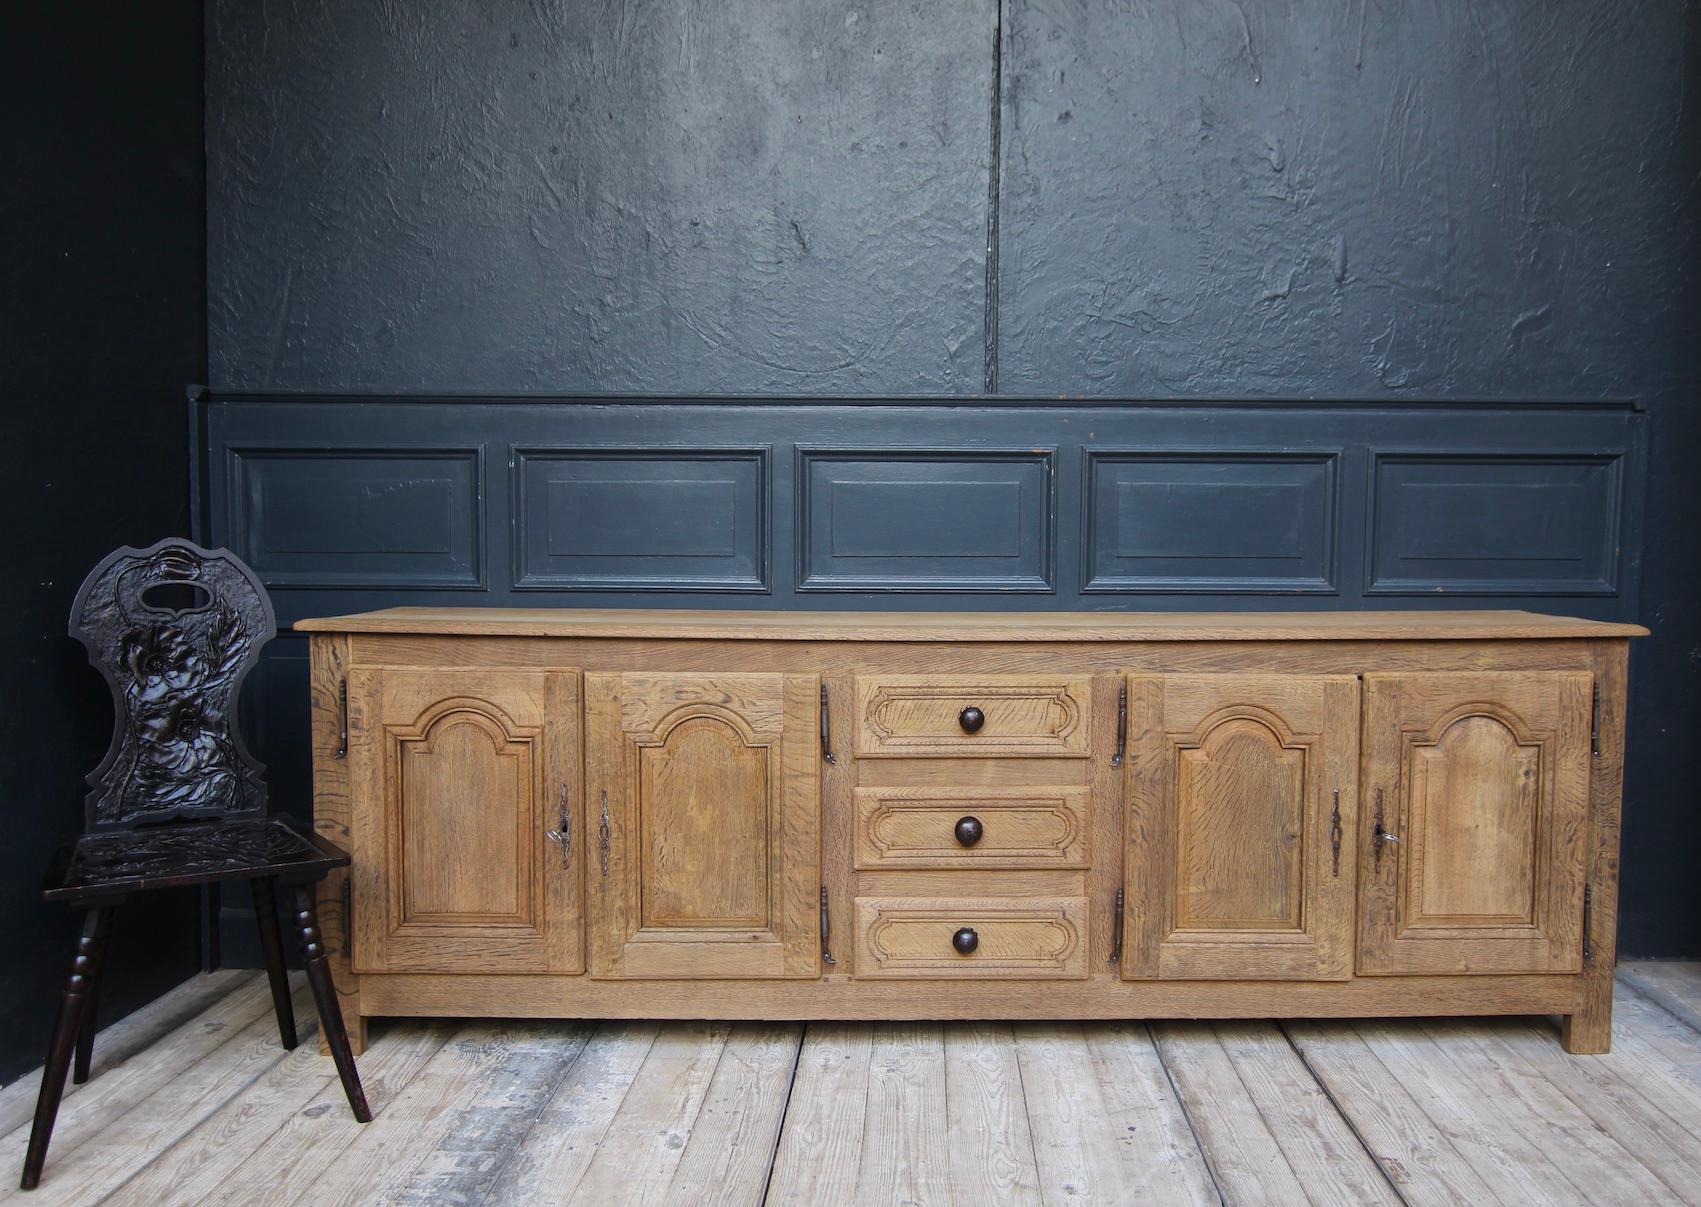 French Provincial Early 19th Century French Stripped Oak Enfilade Sideboard